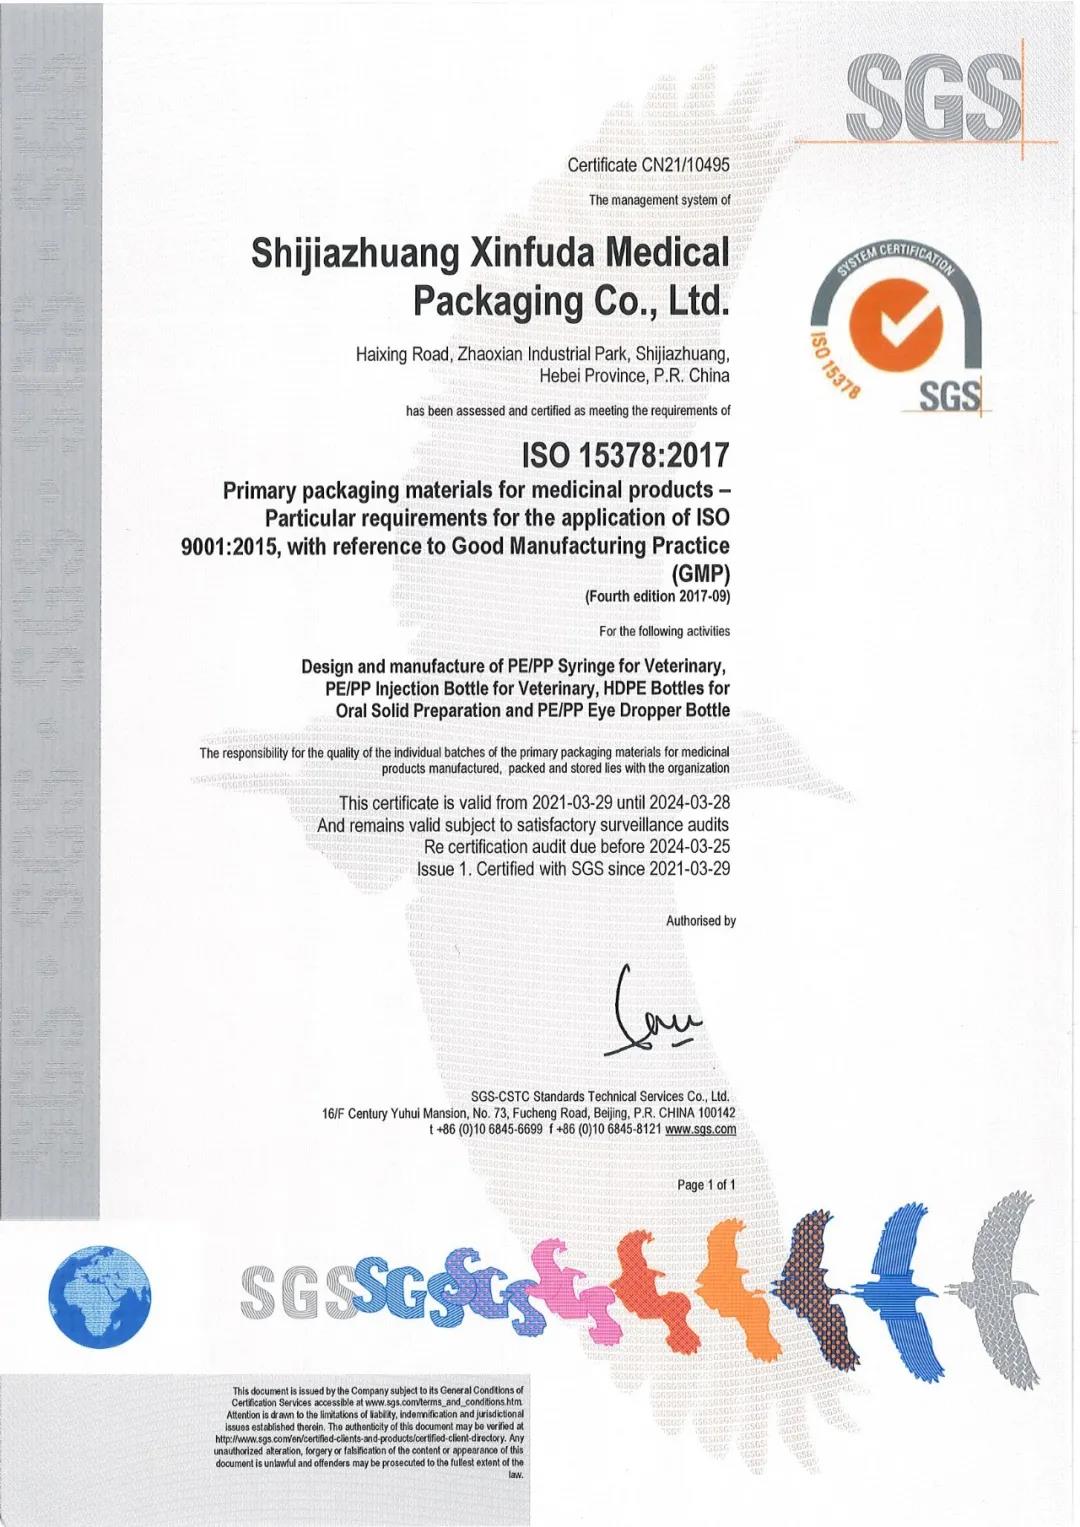 What is the ISO15378 quality management system